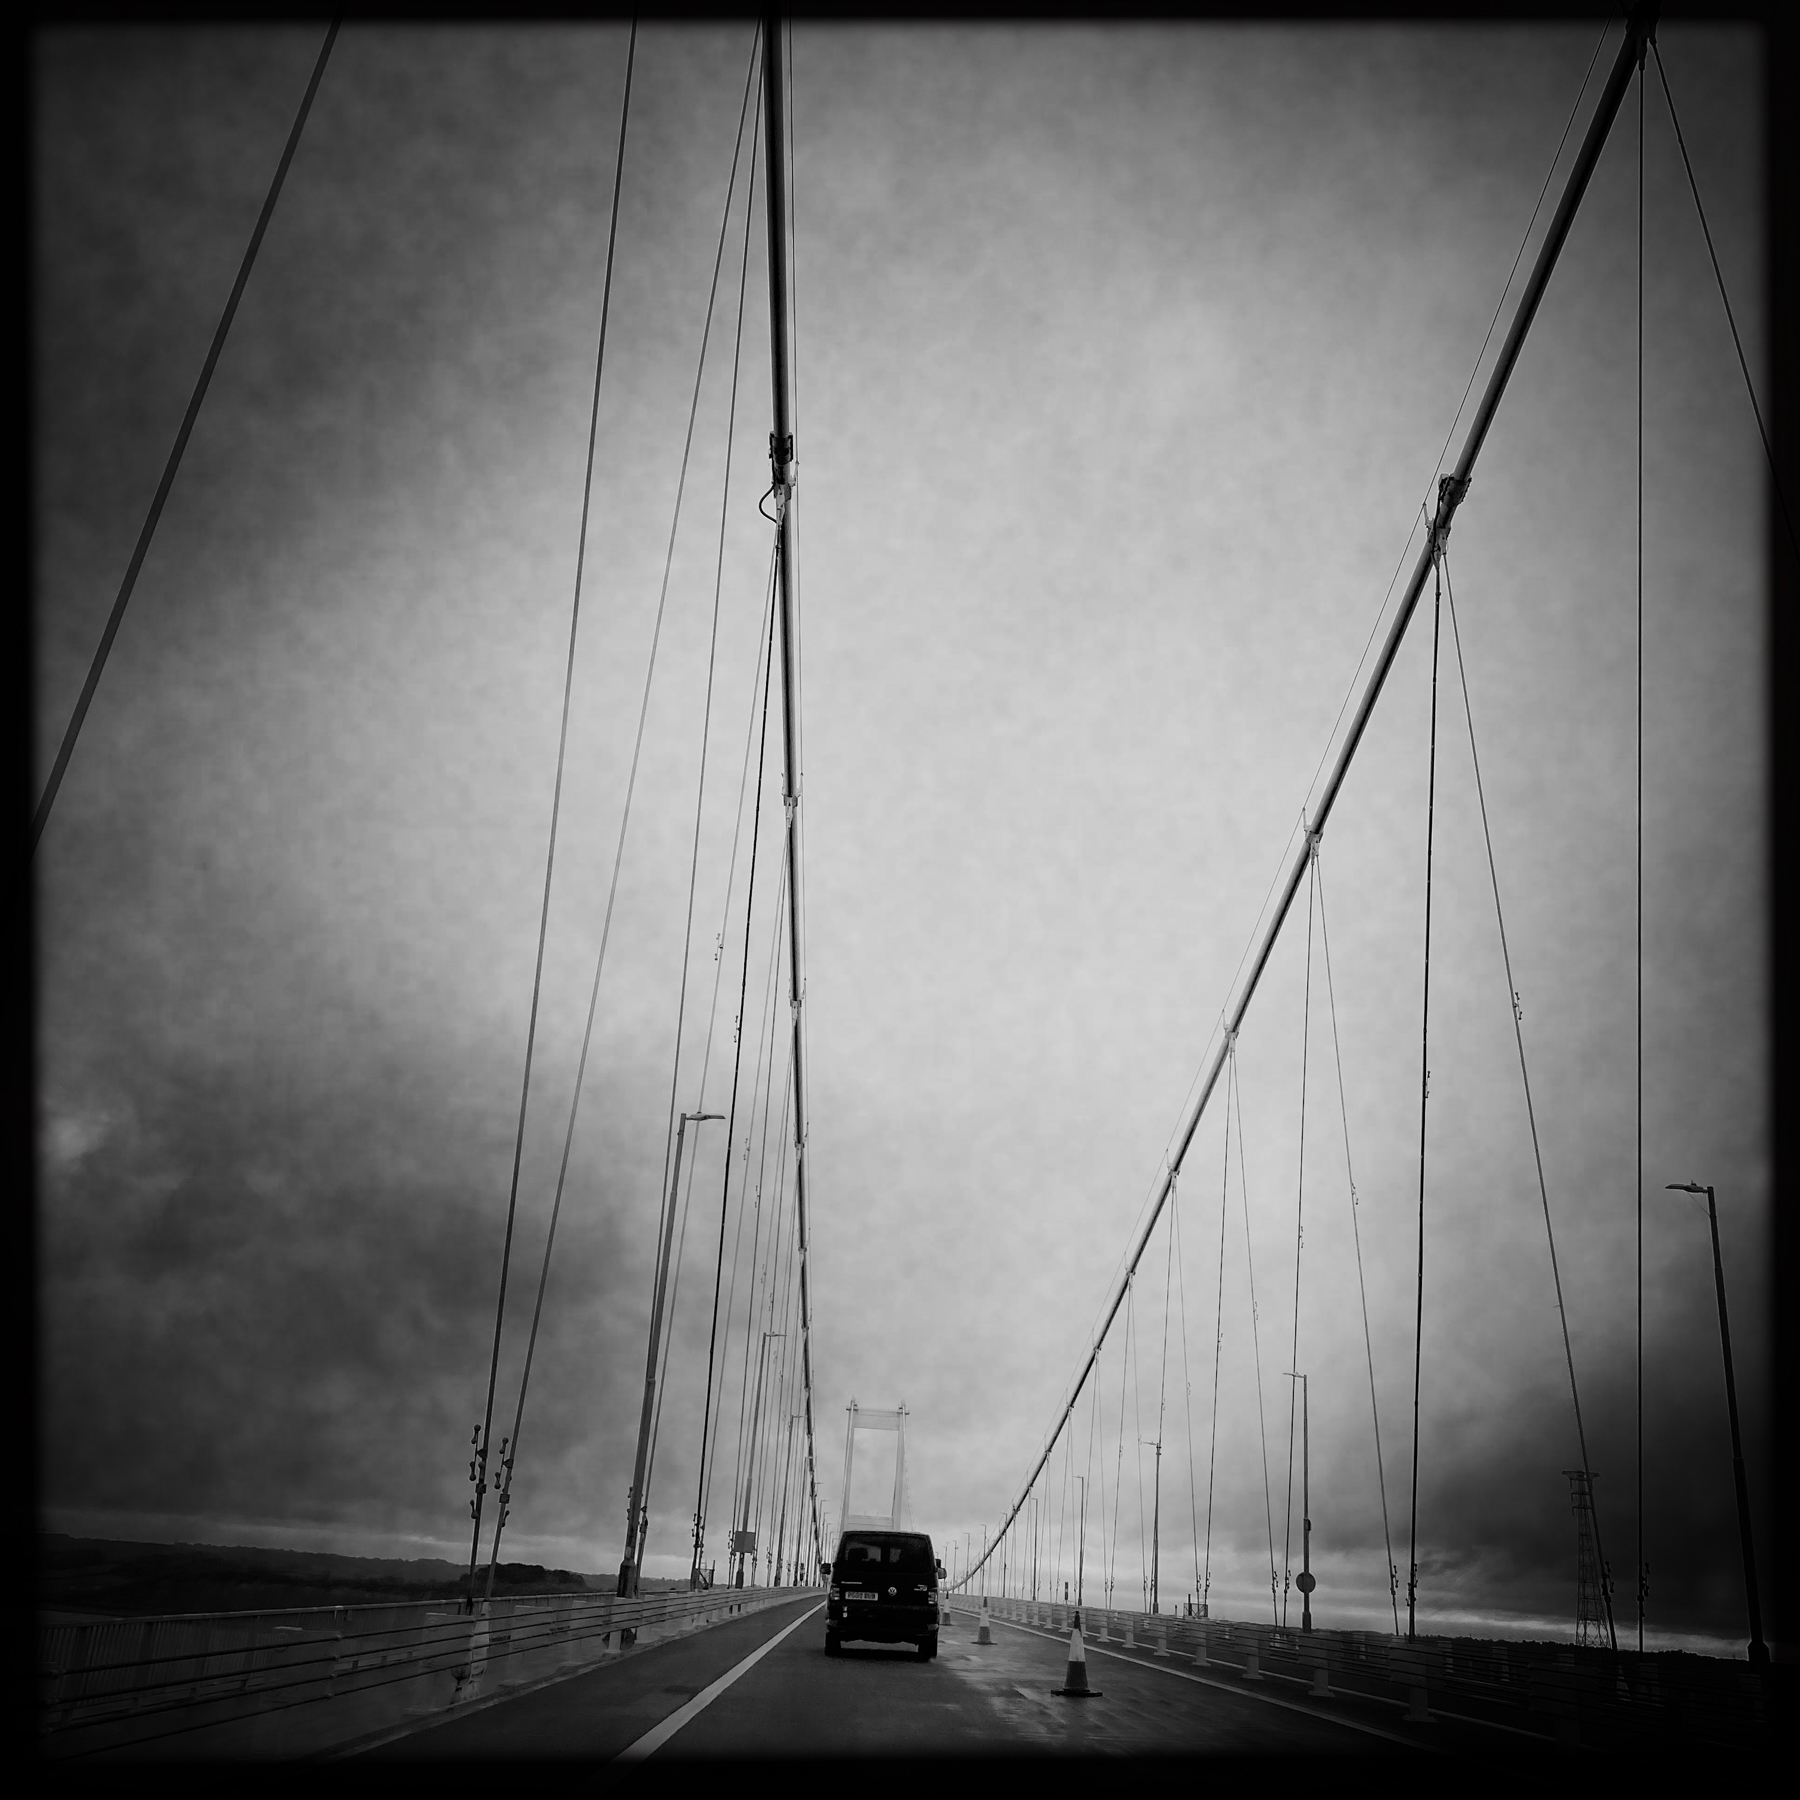 Black and white photo of a suspension bridge, with cables converging towards the top of the towers, and a single van driving along the road.